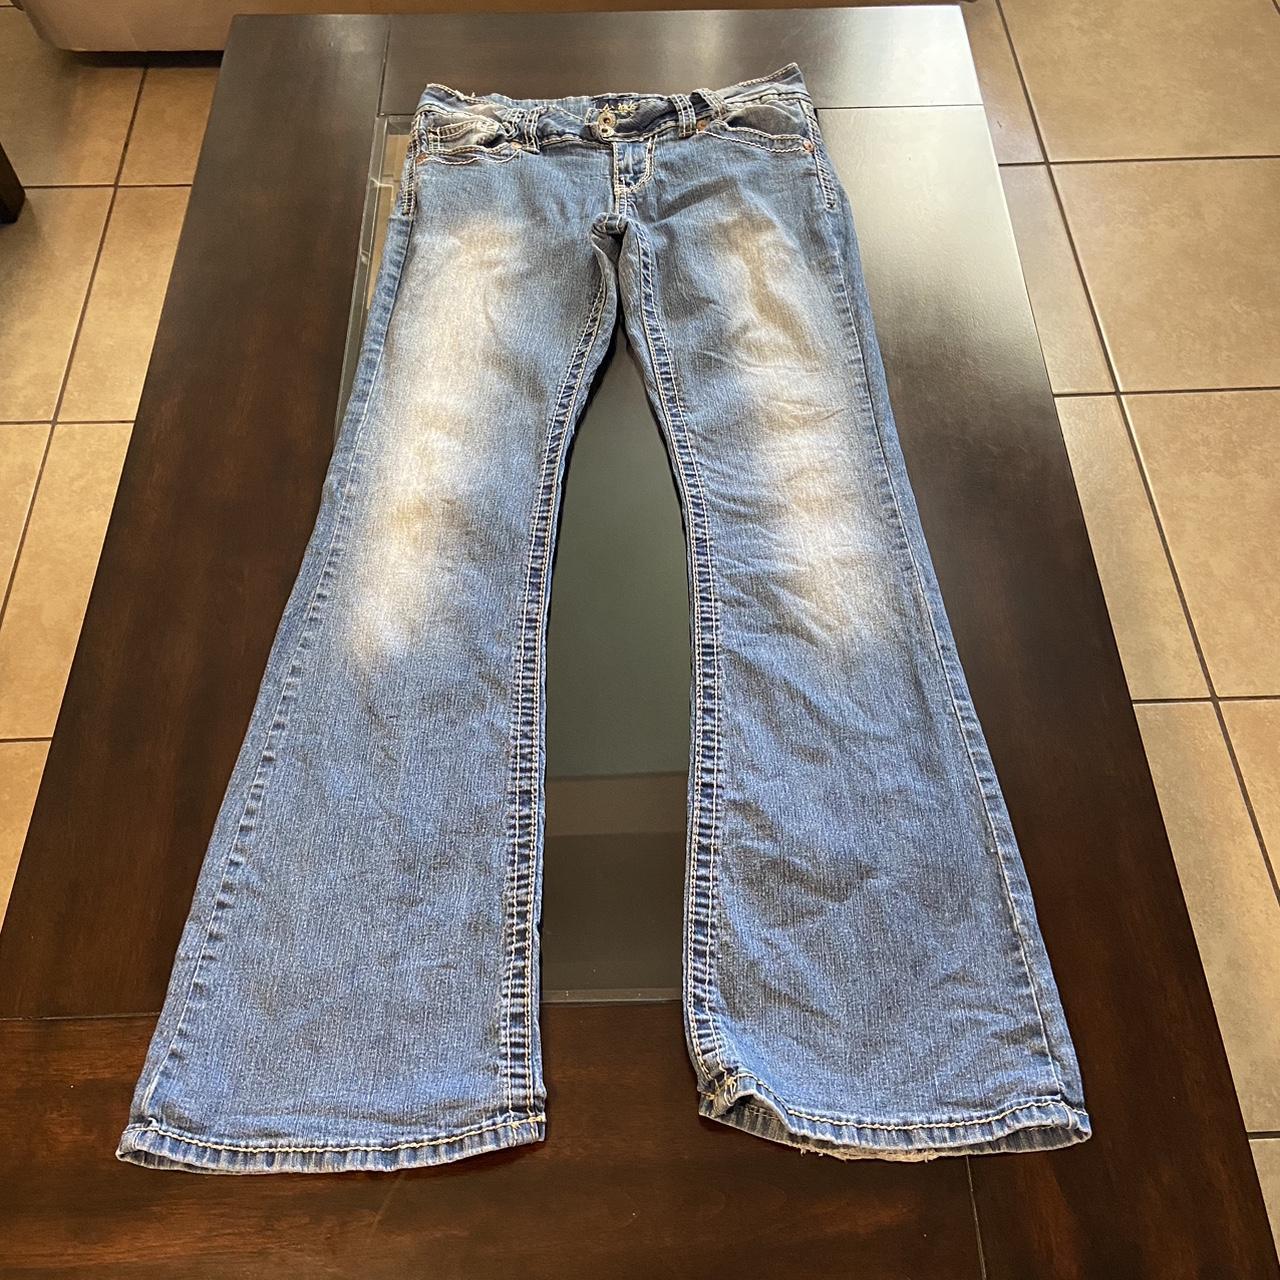 Early 2000’s low rise boot cut jeans by Angels in... - Depop